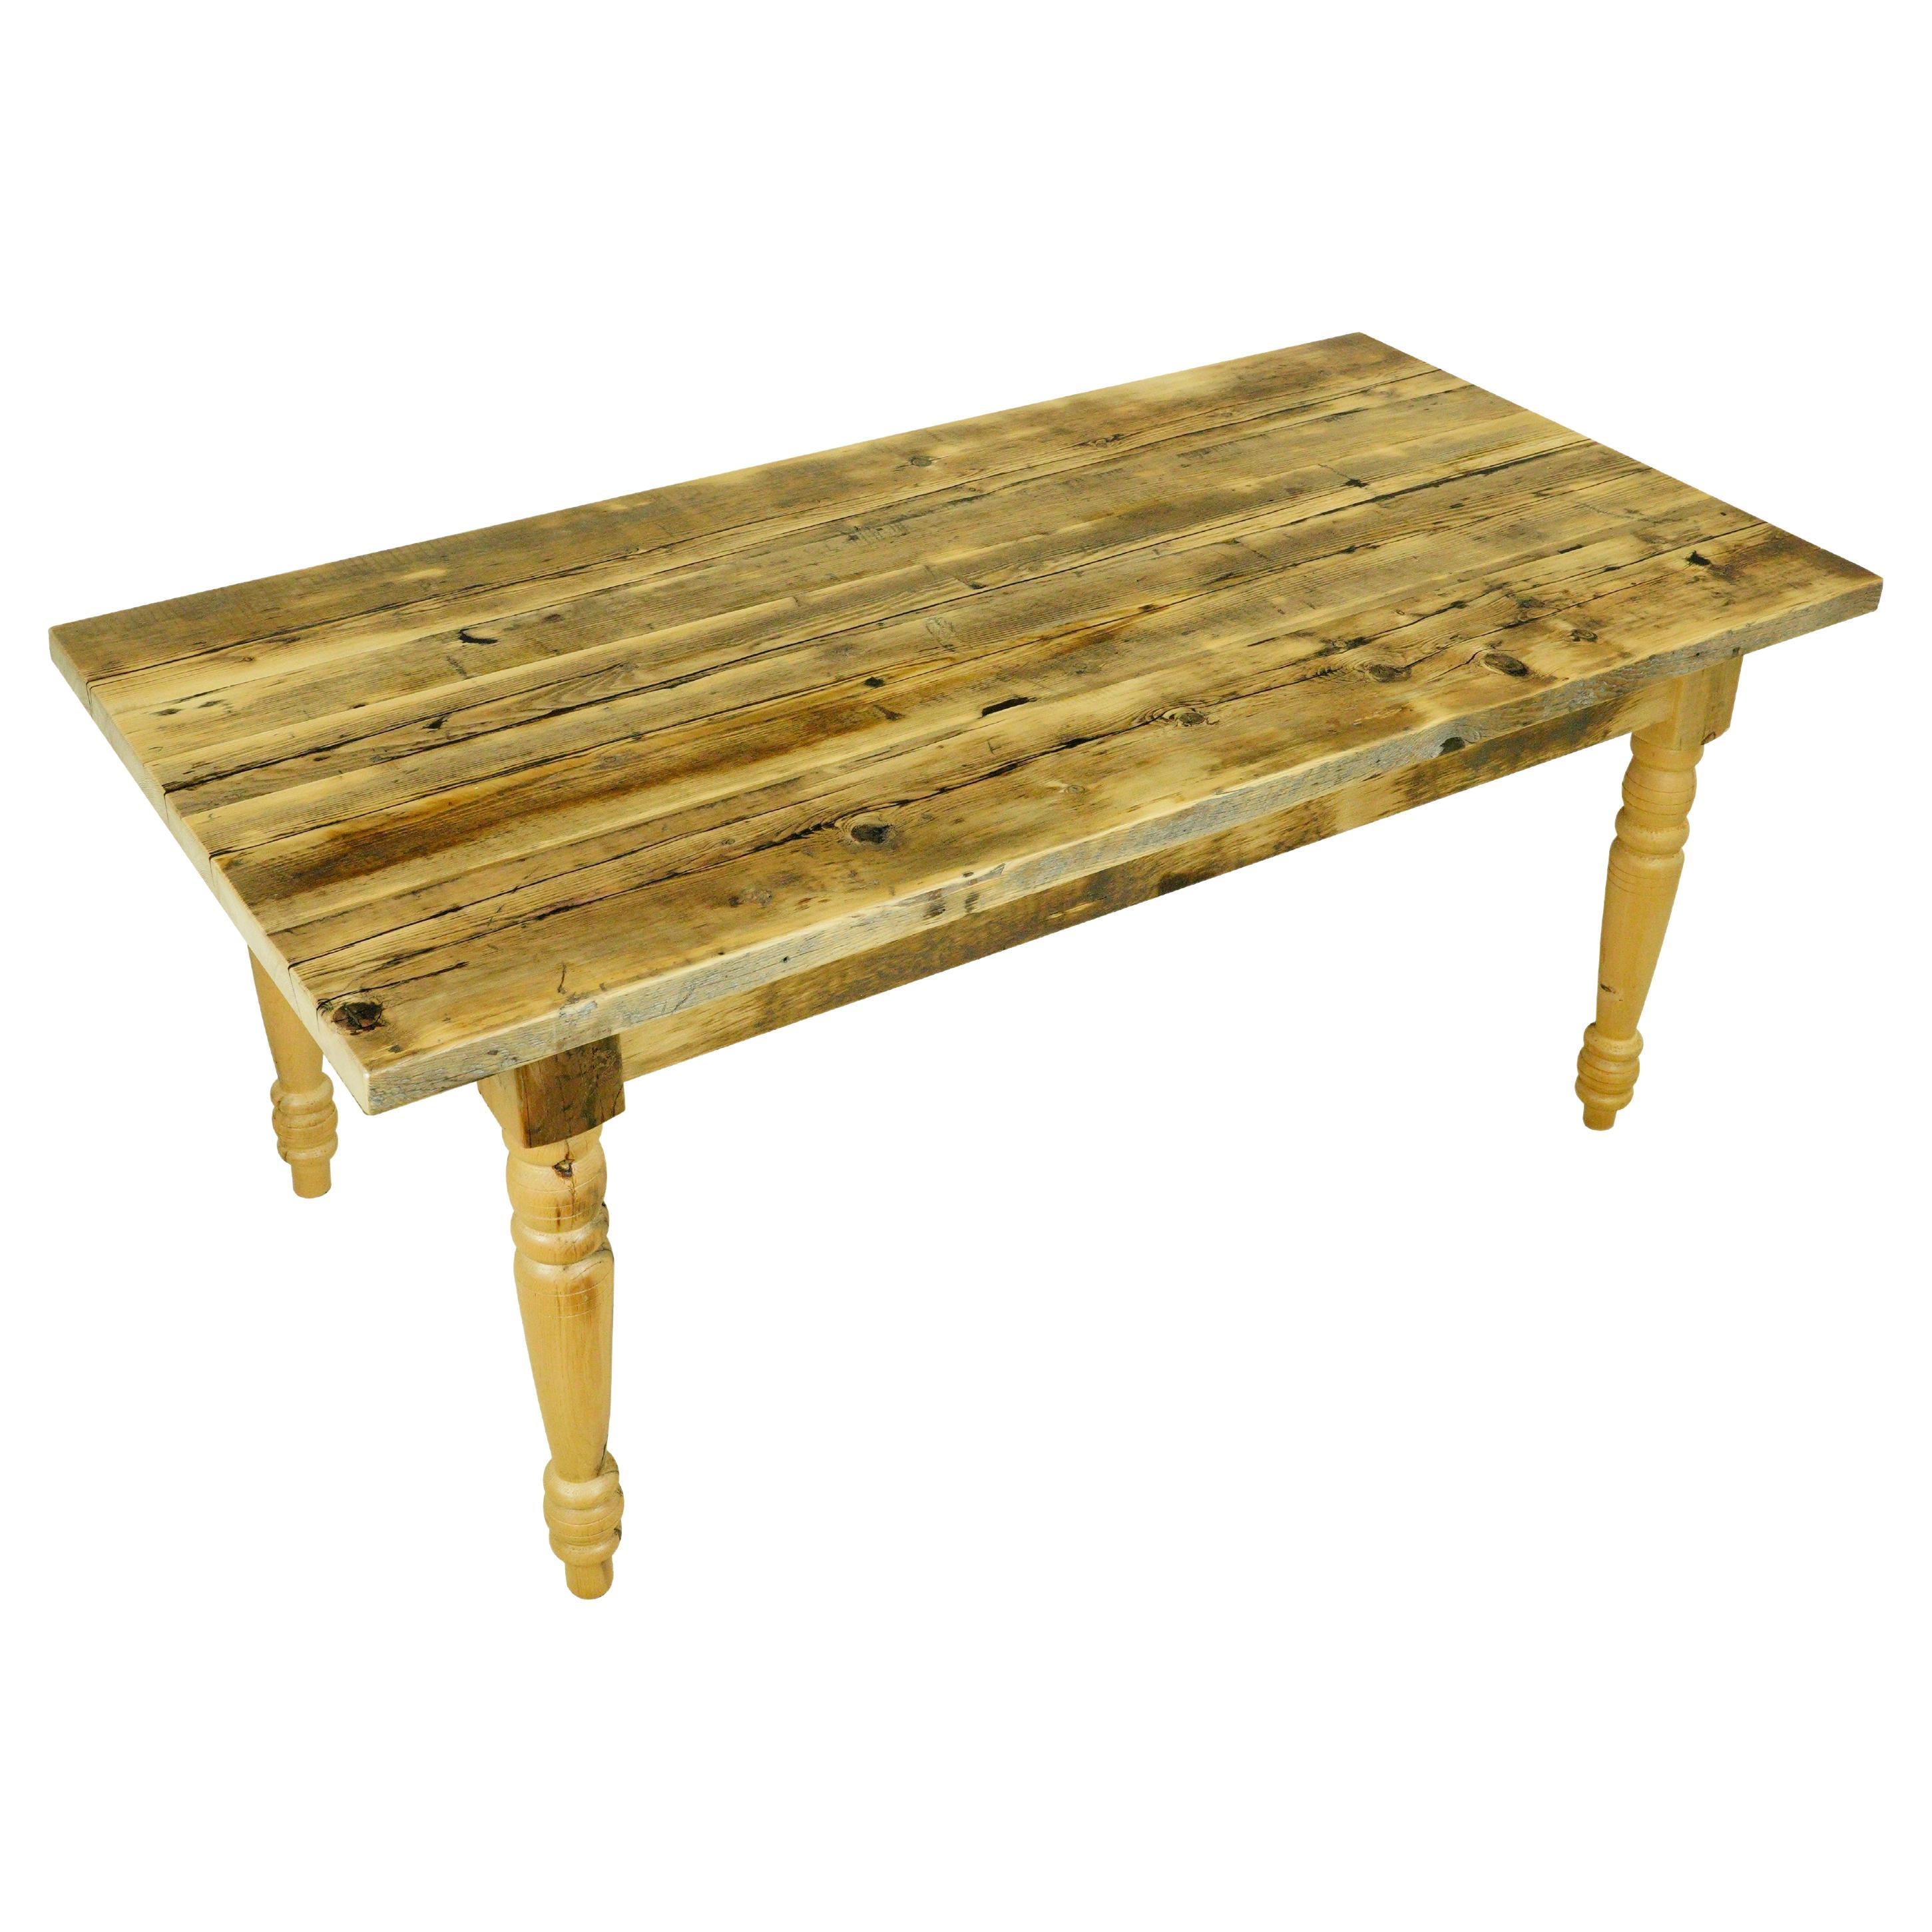 6 ft Rustic Pine Turned Legs Farm Dining Table For Sale